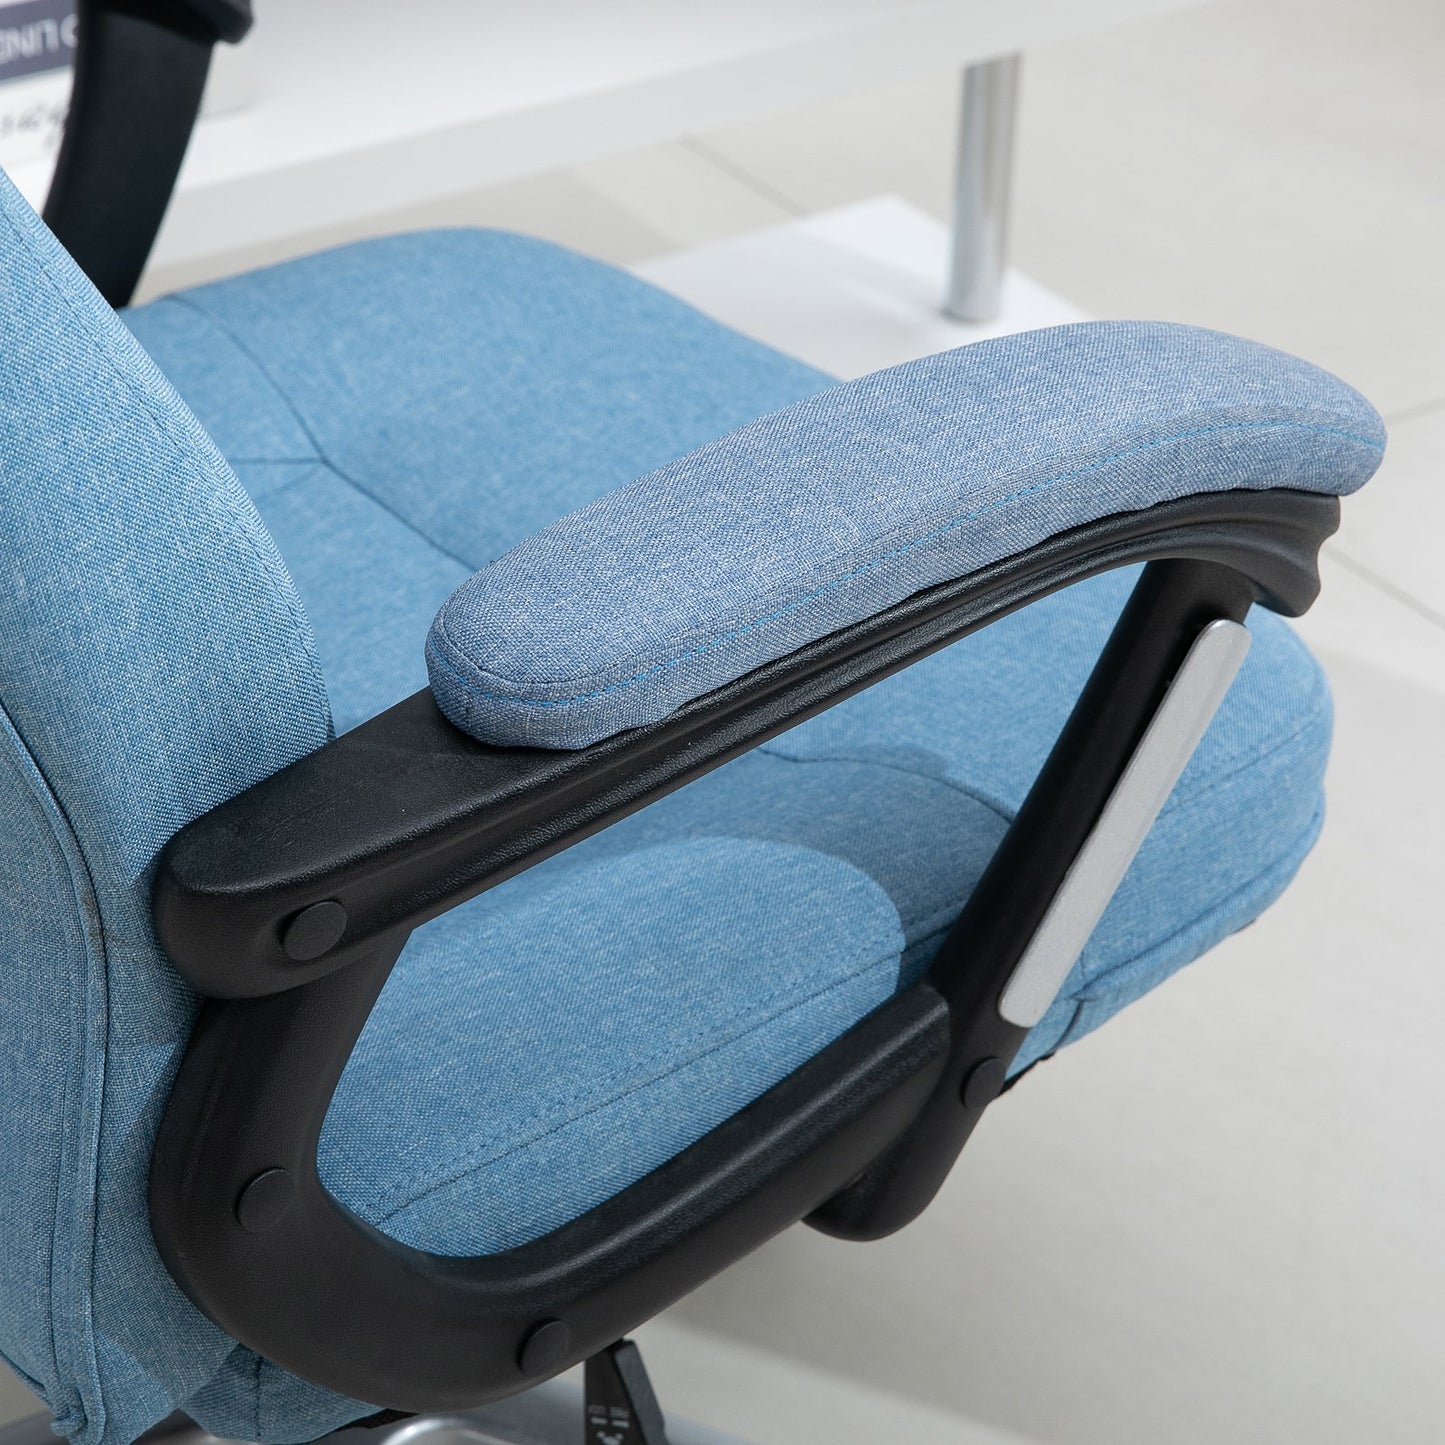 Vinsetto Executive Office Gaming Chair Linen Rocking Seat w/ Adjustable Padded Seat & Wheels in Blue